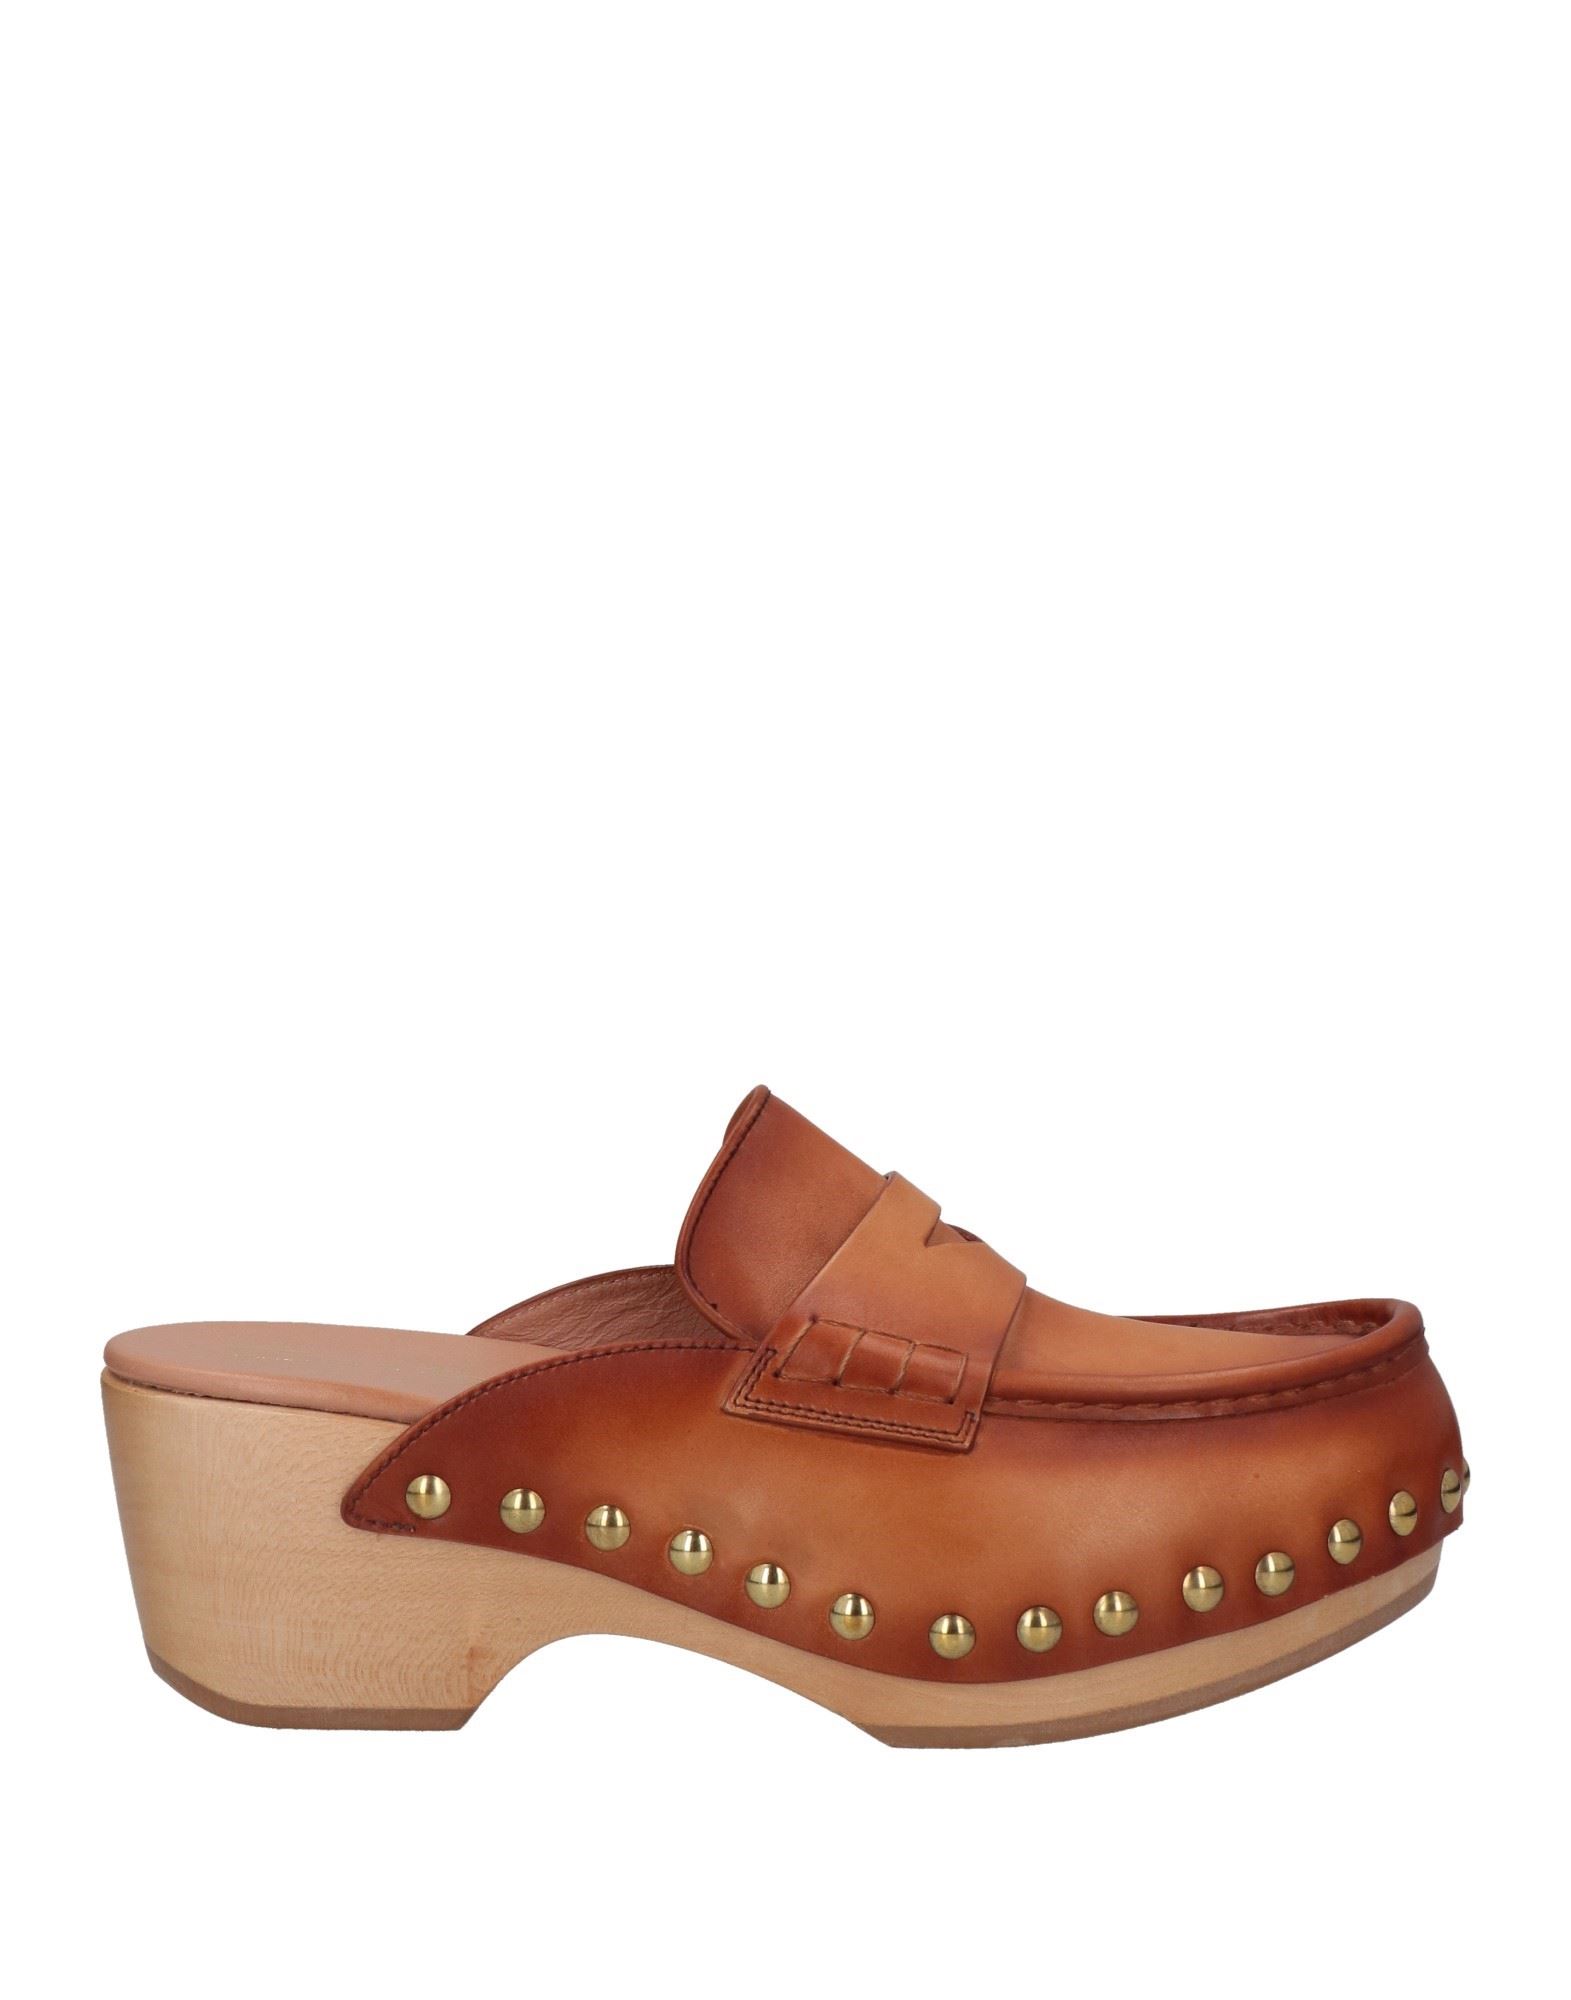 Santoni Woman Mules & Clogs Tan Size 7 Soft Leather In Brown